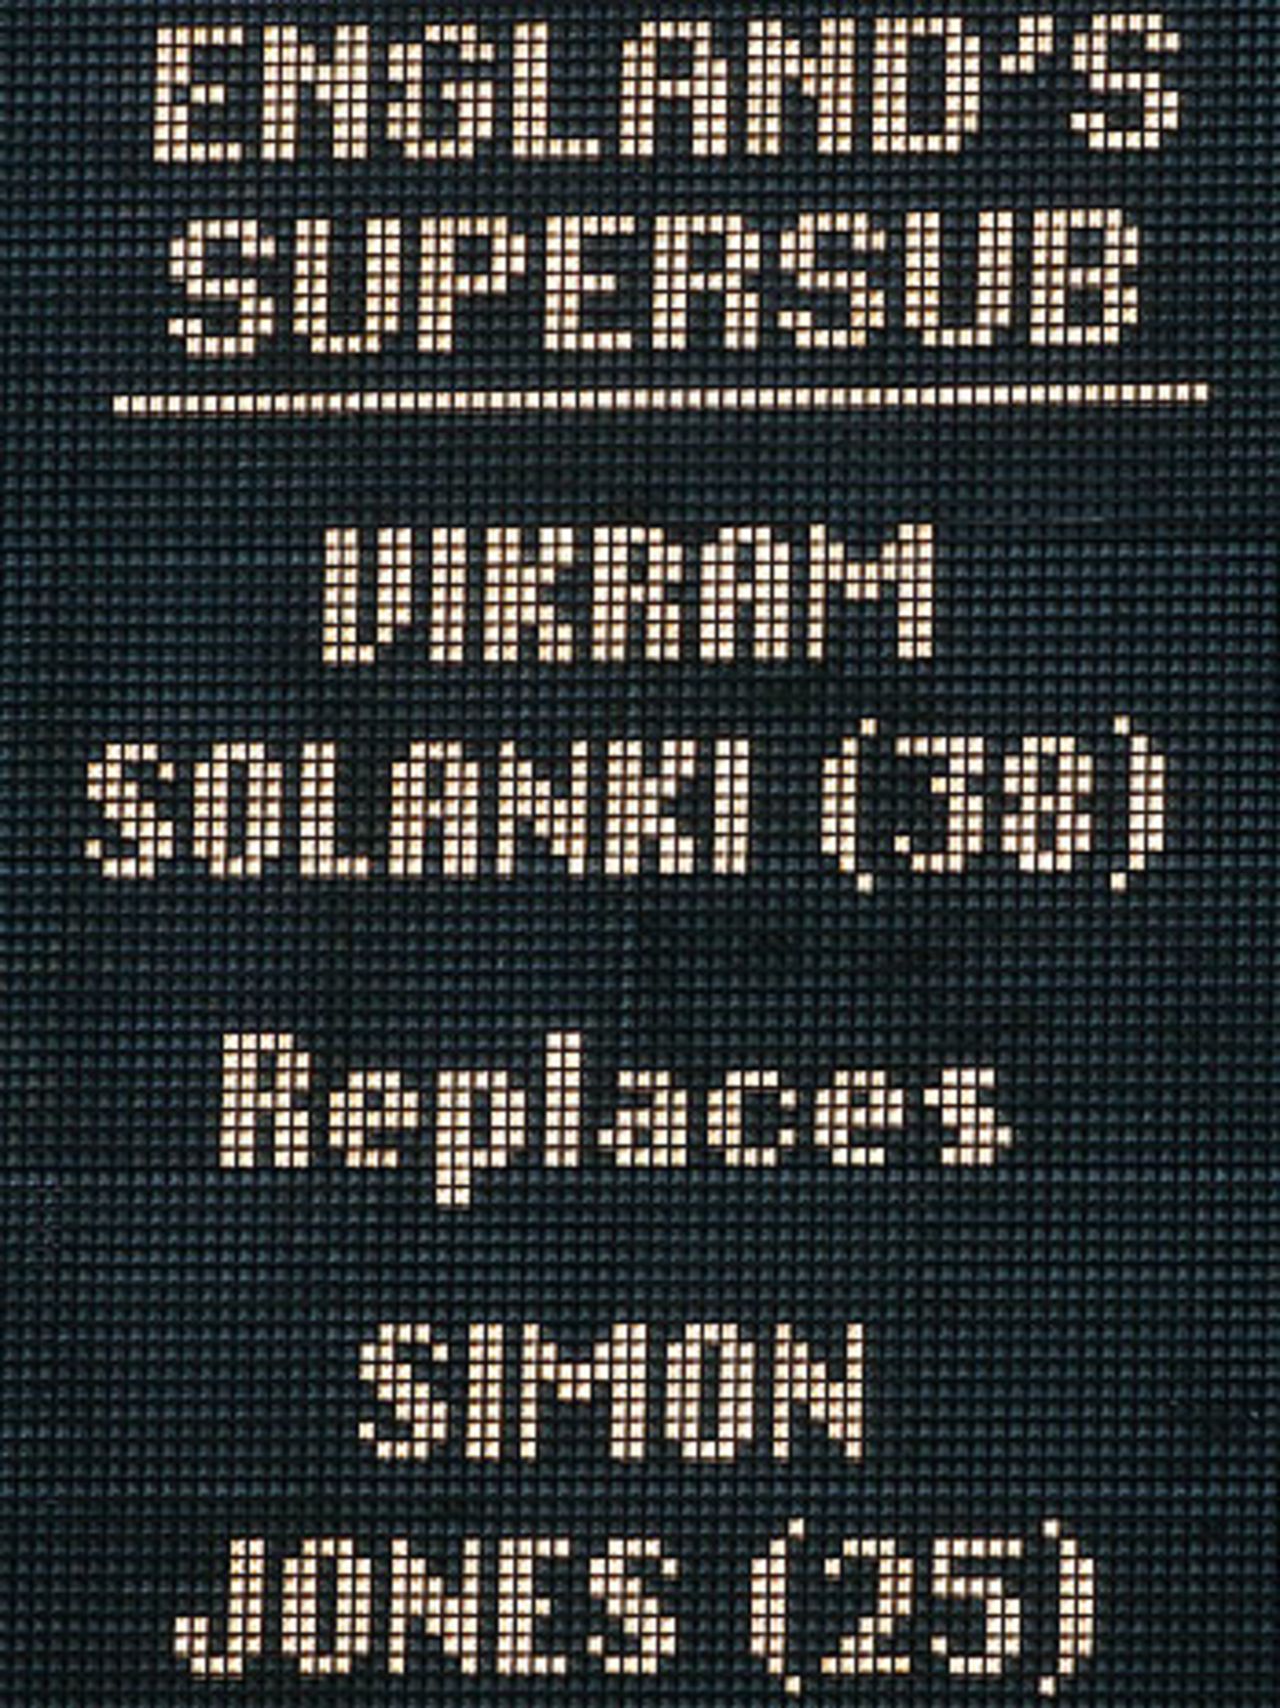 Vikram Solanki is announced as one-day cricket's first supersub, England v Australia, NatWest Challenge, Headingley, July 7, 2005